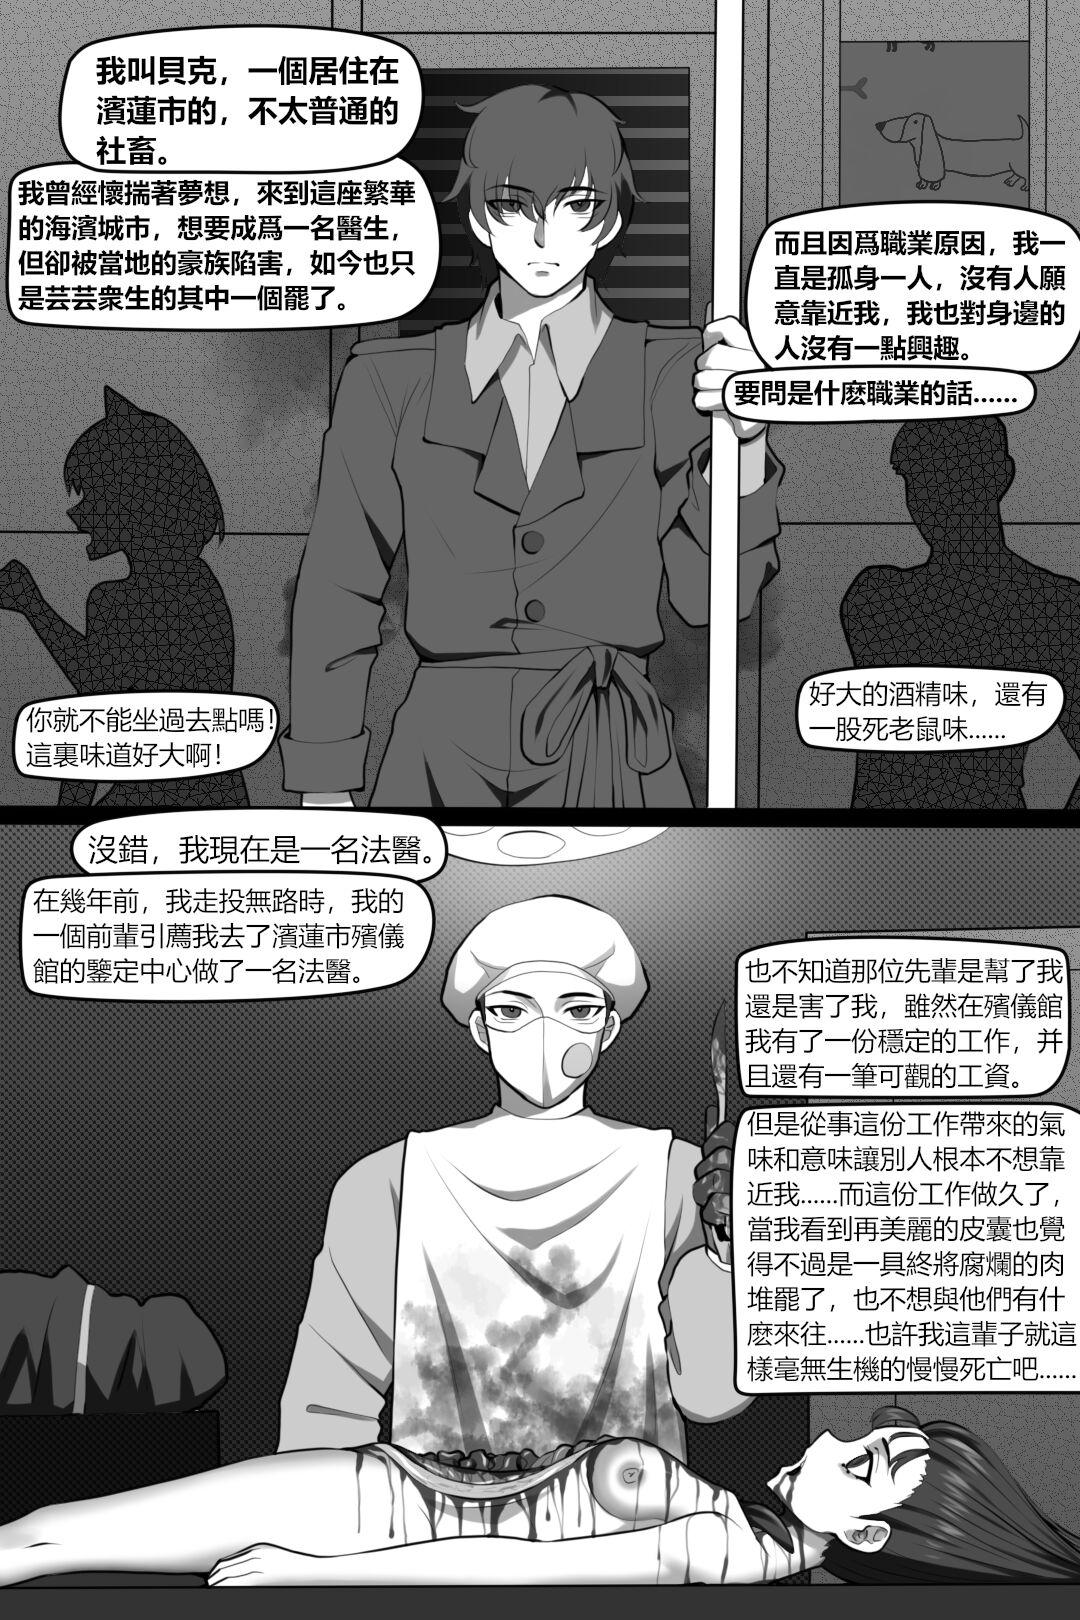 Puta Bin Lian City Stories Chapter 3: Corrupted Forensic - Original Leather - Page 3